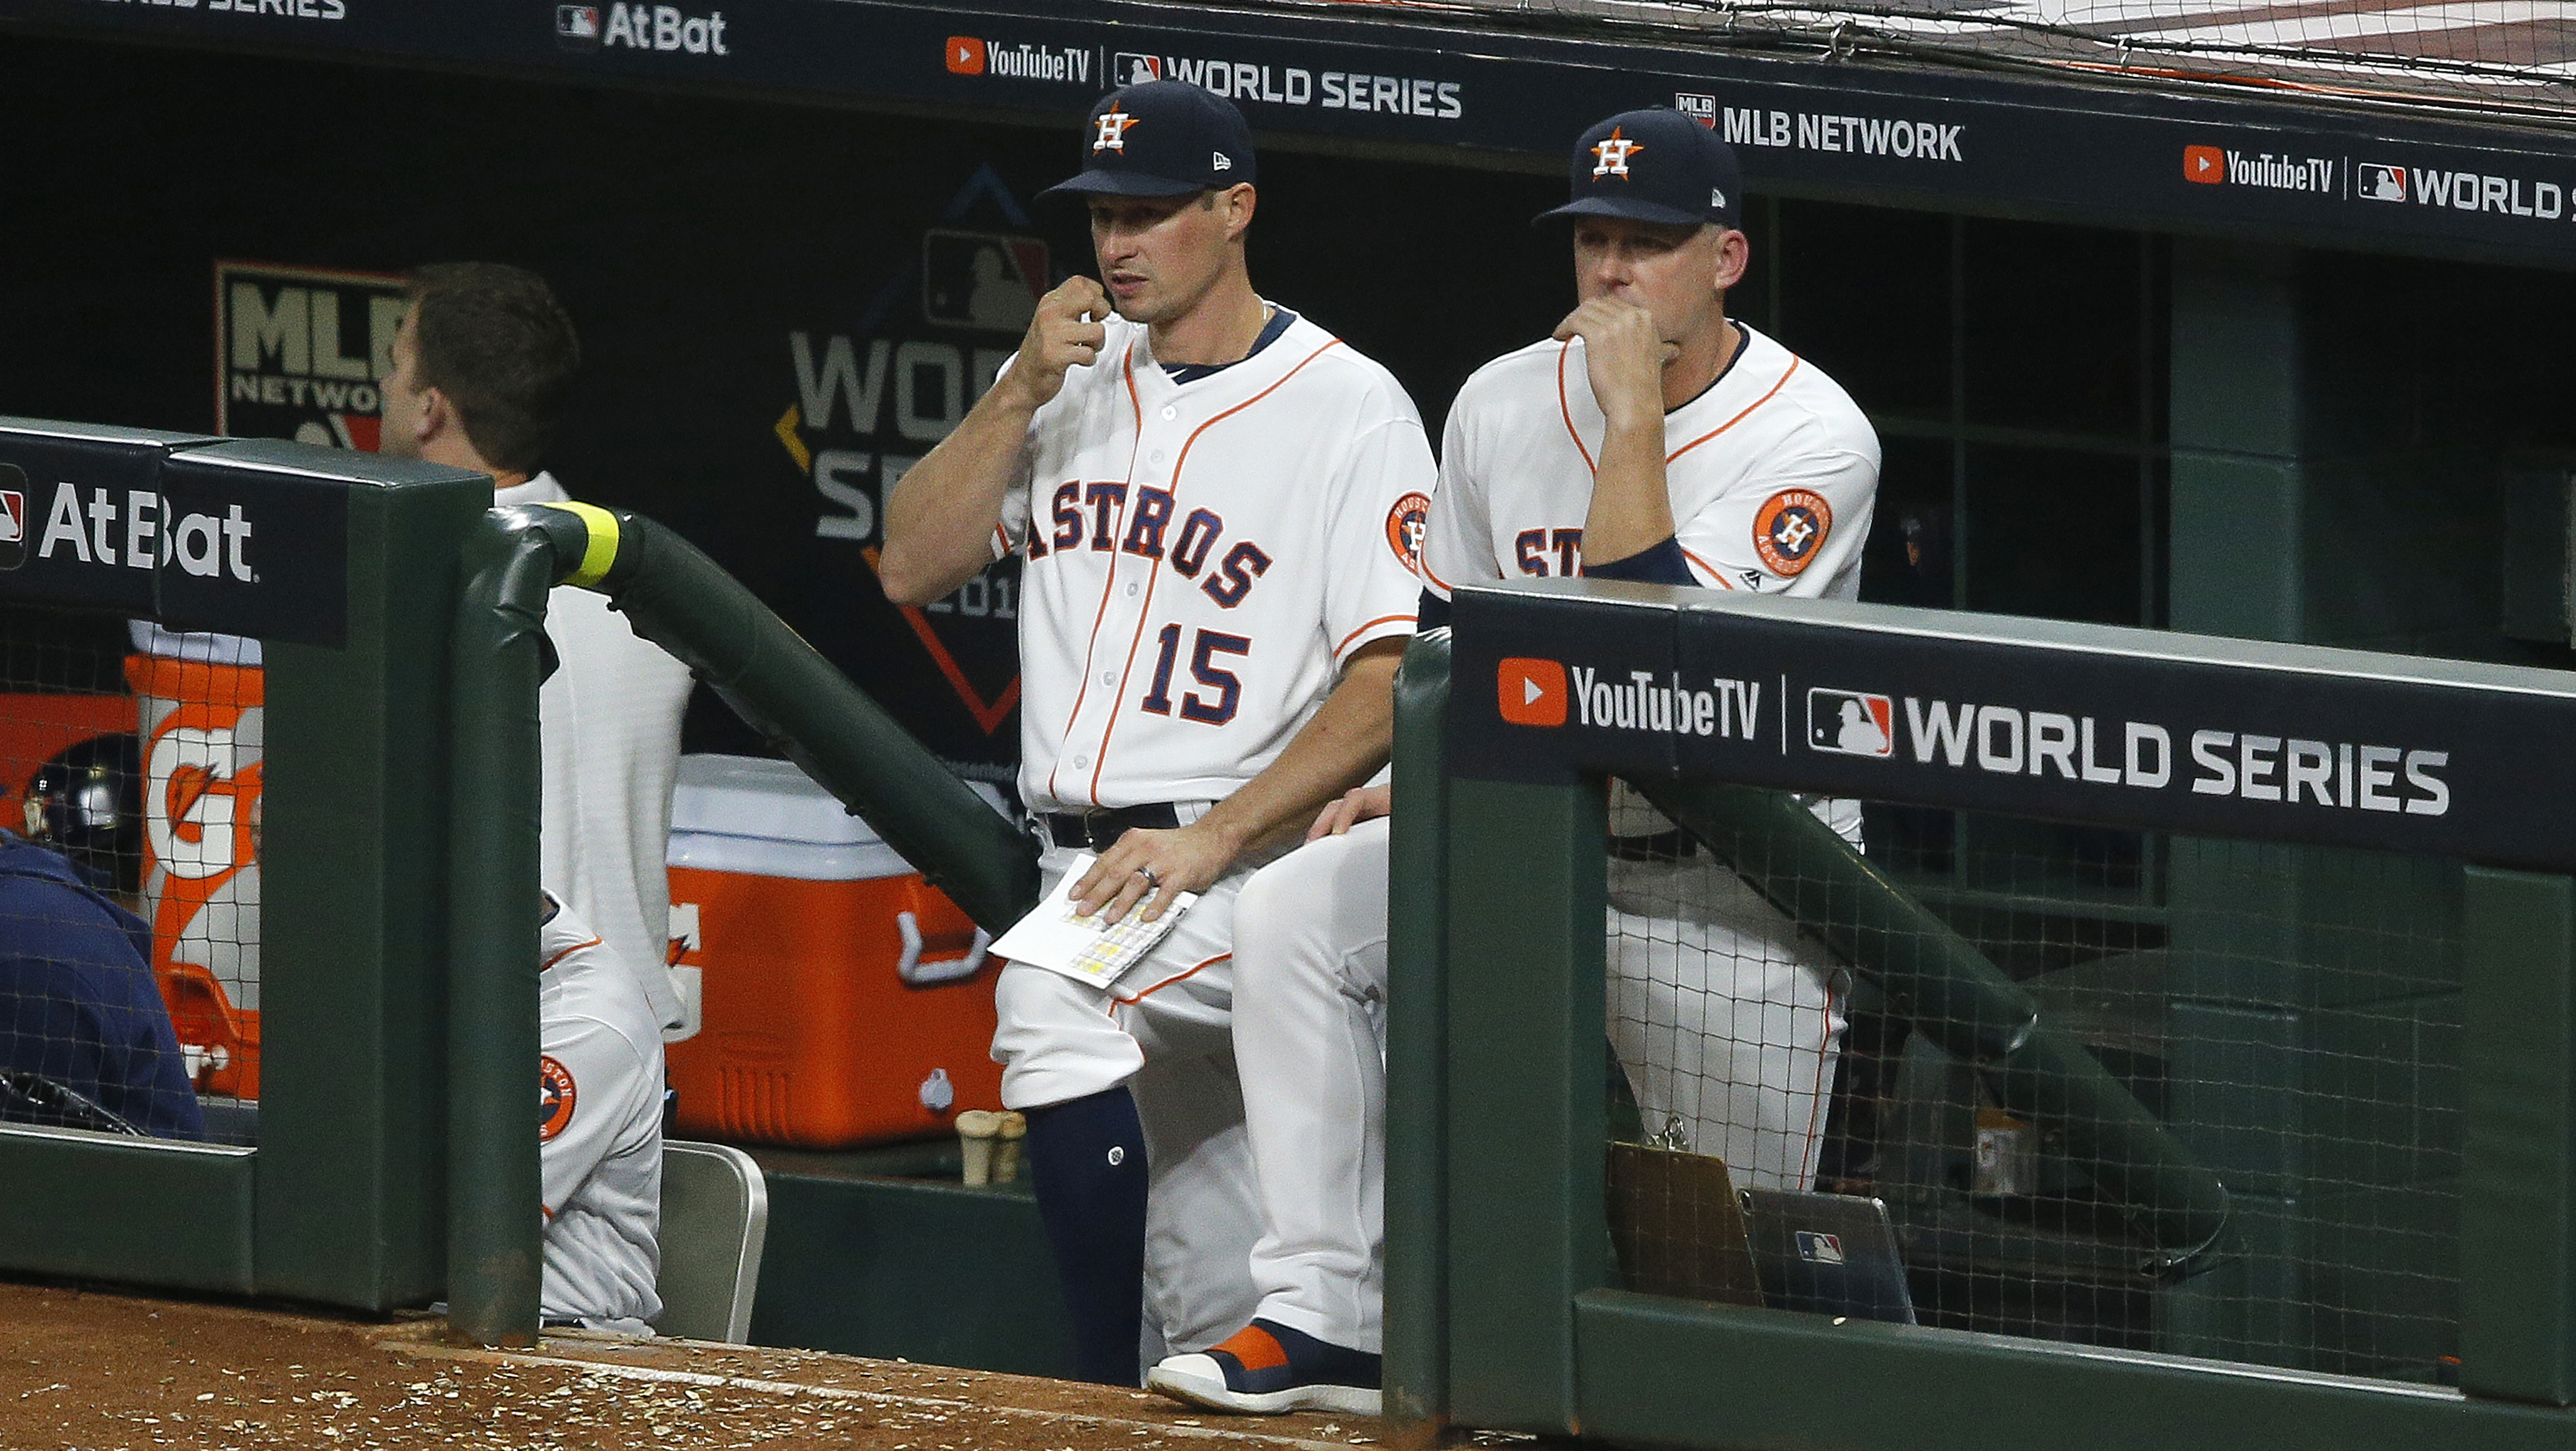 Report: Astros complained to MLB about fan behavior